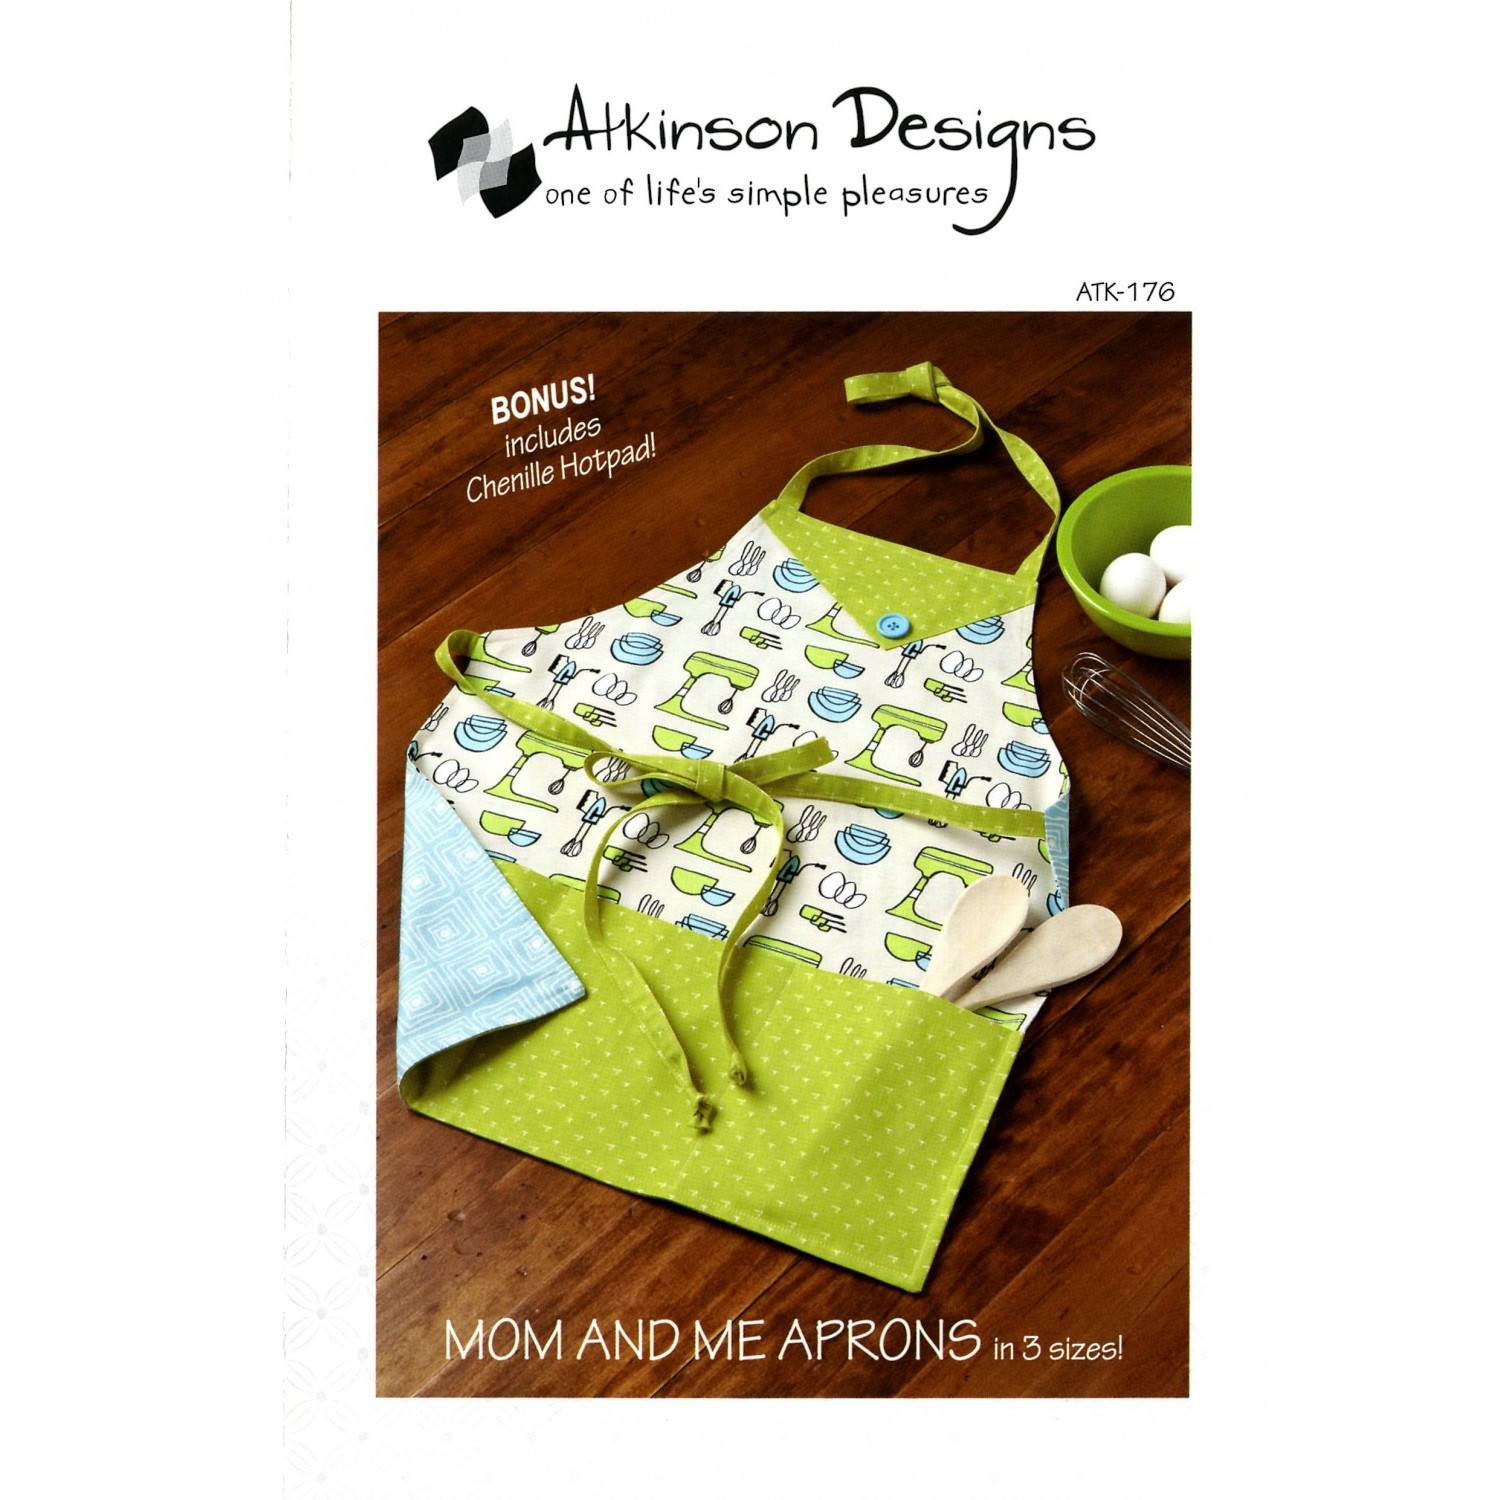 Mom and Me Aprons Pattern, Atkinson Designs image # 35274